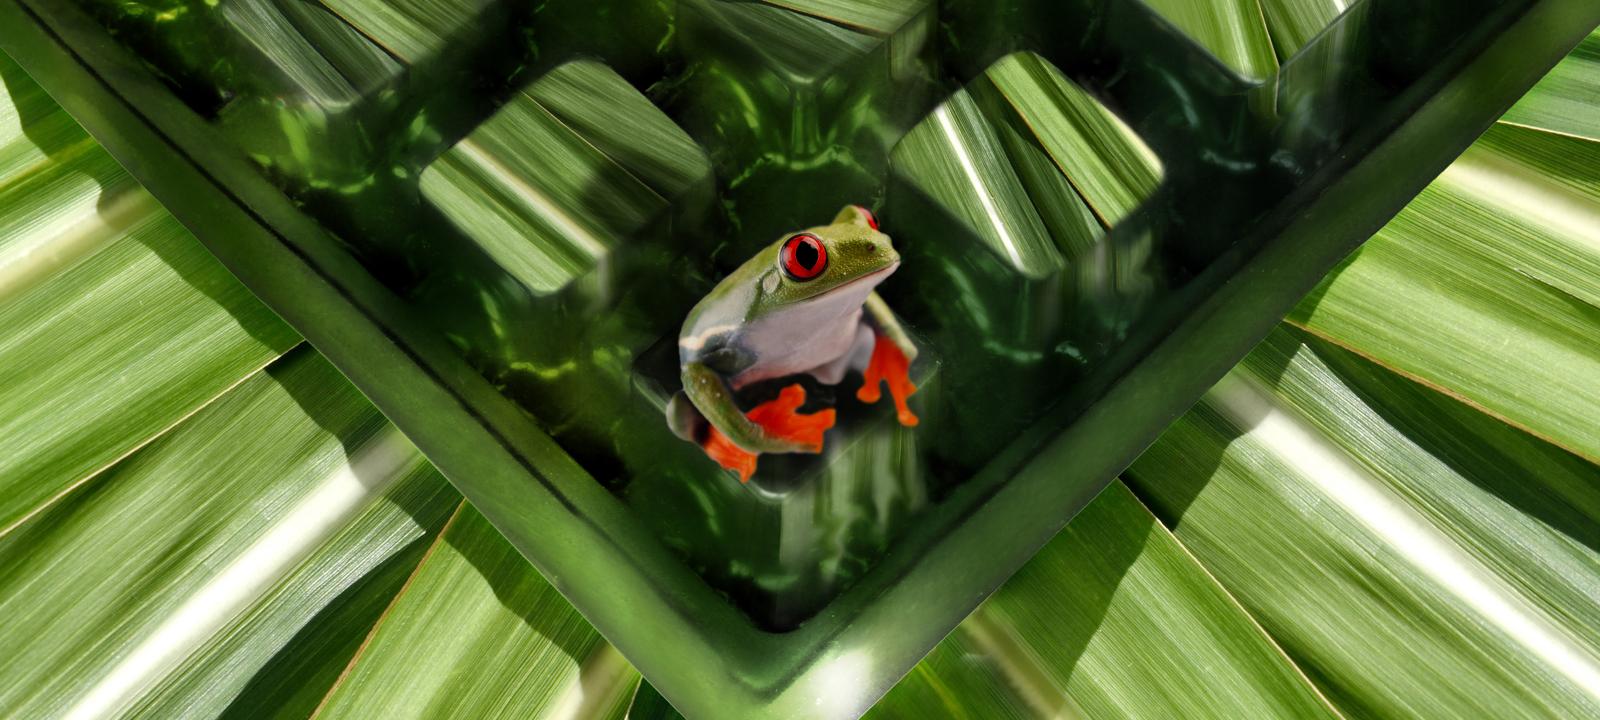 Frog sitting on a drainage element covered with sugar cane leaves